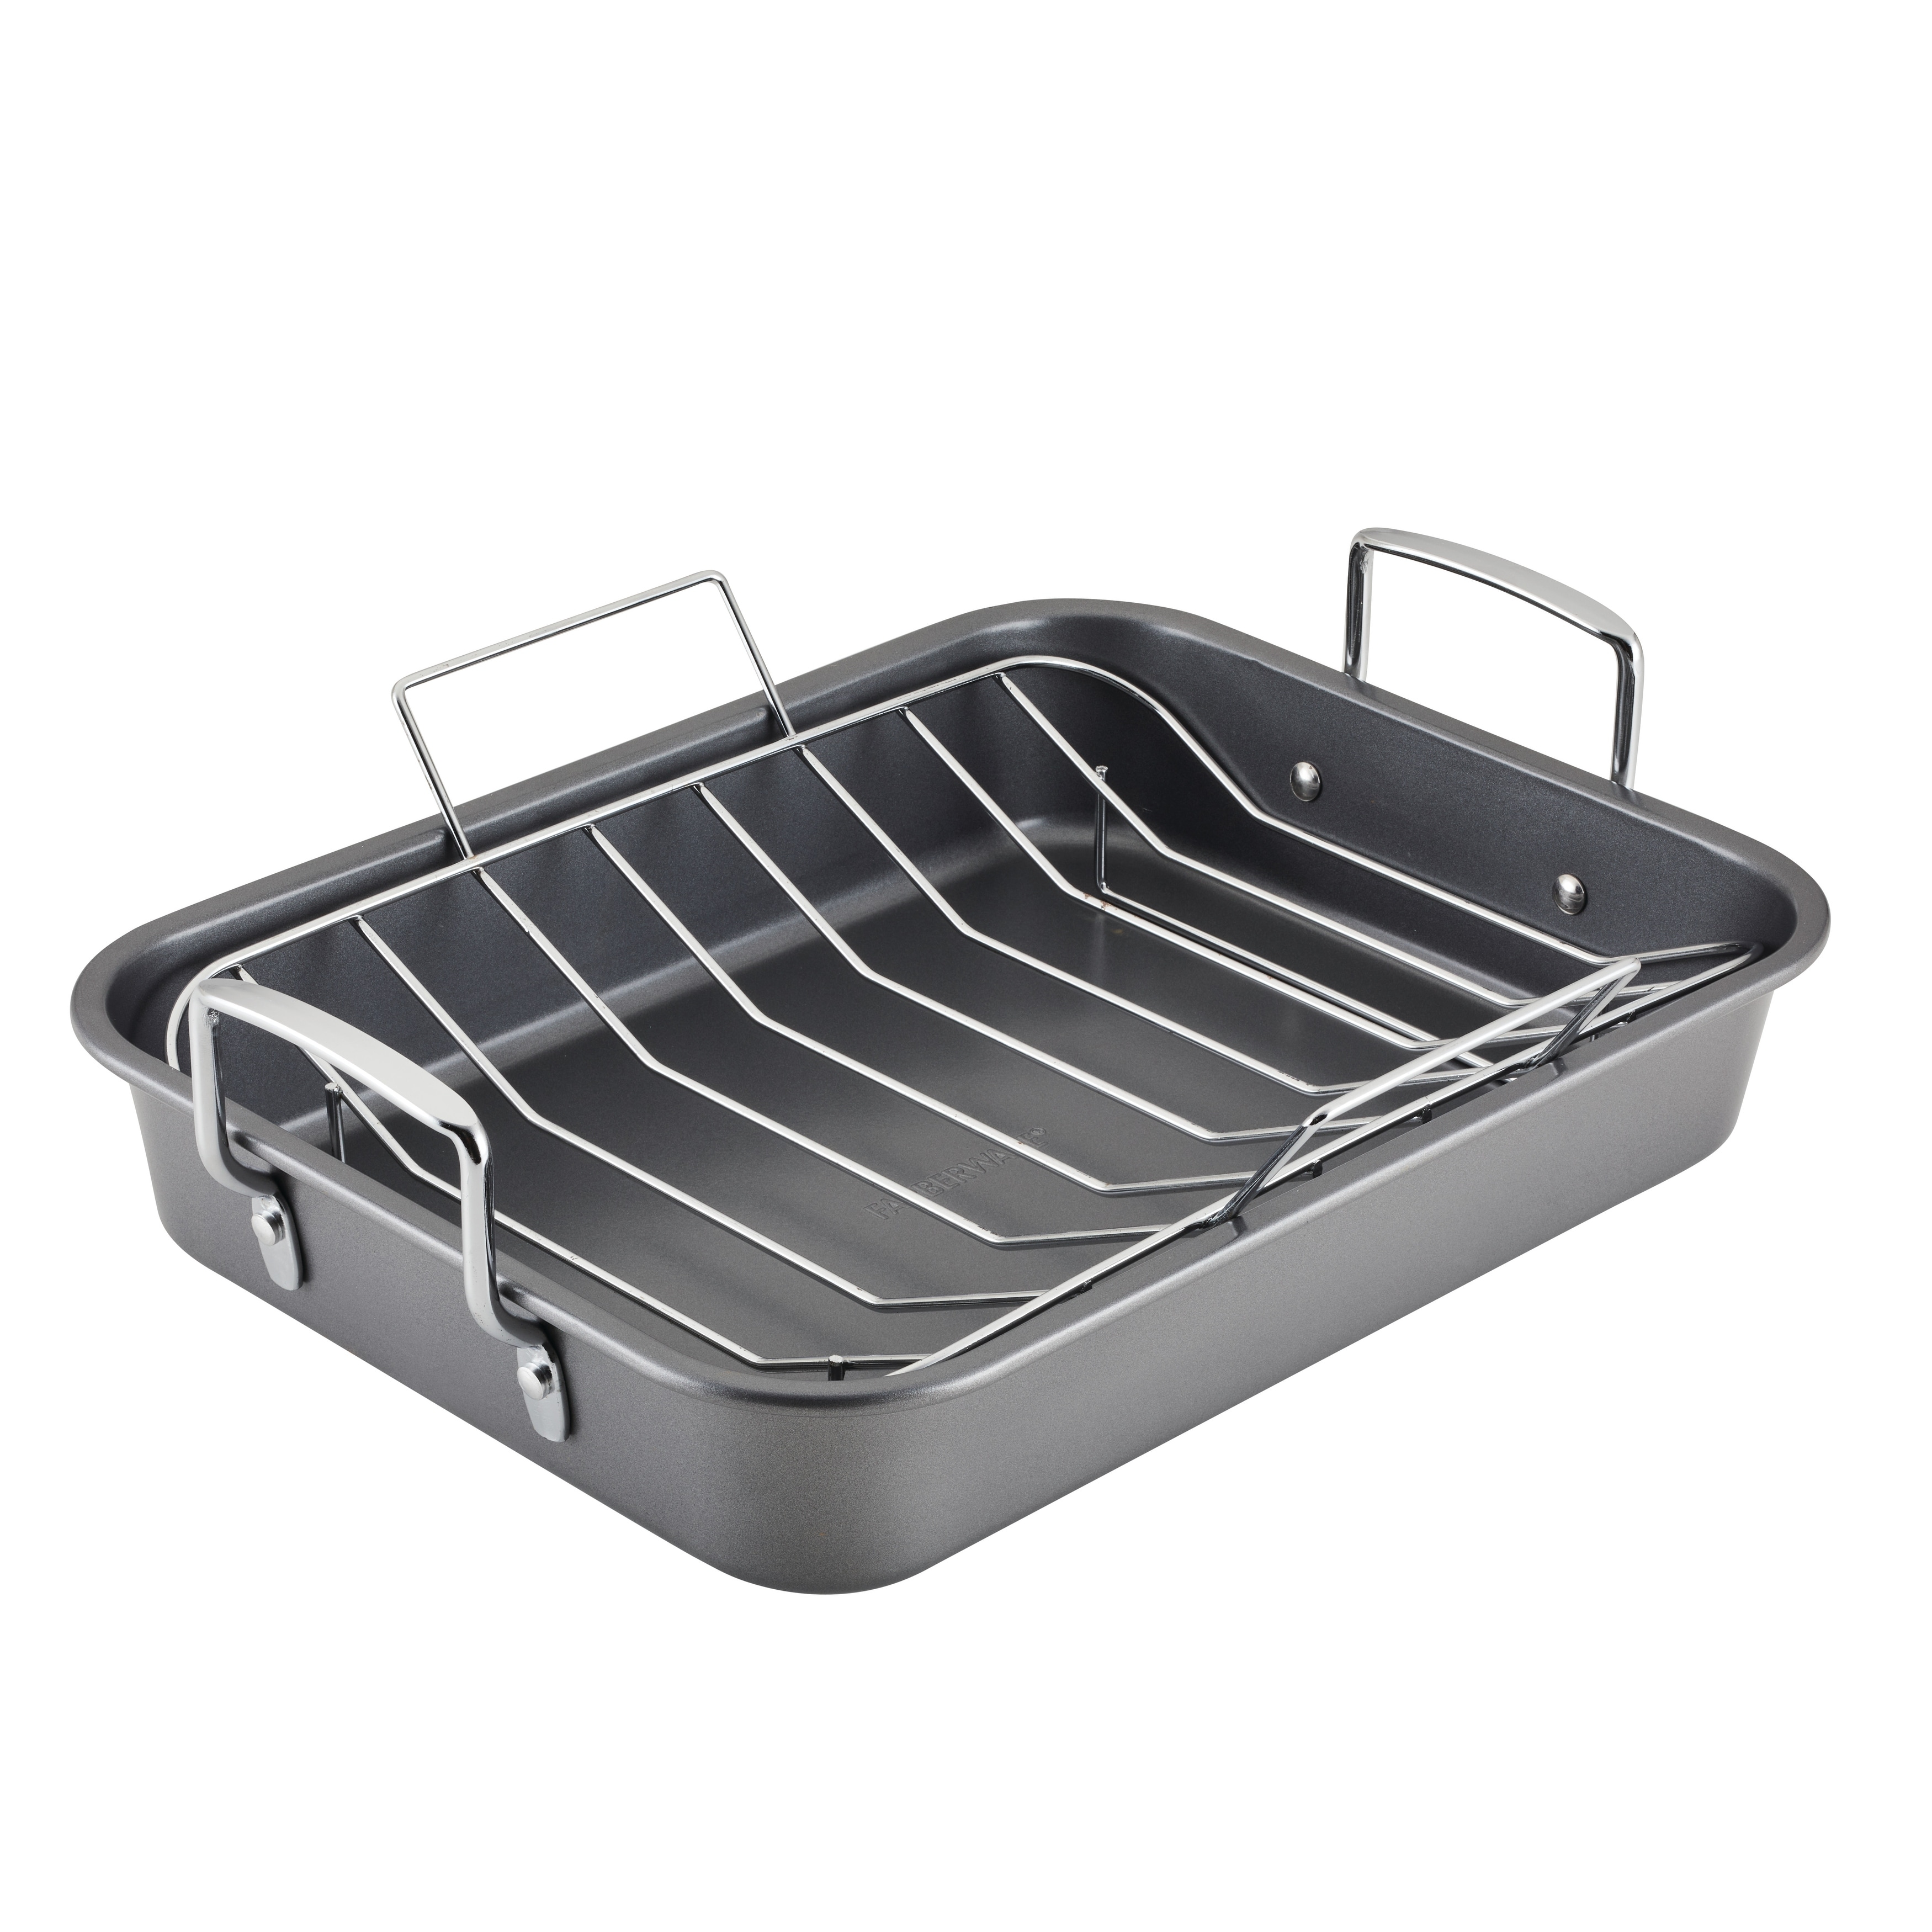 https://ak1.ostkcdn.com/images/products/is/images/direct/2ef0cbc1bccc49daadb01ef54d8cfa78d2318a38/Farberware-Nonstick-Bakeware-Roaster-with-Rack%2C-12-Inch-x-16-Inch%2C-Gray.jpg